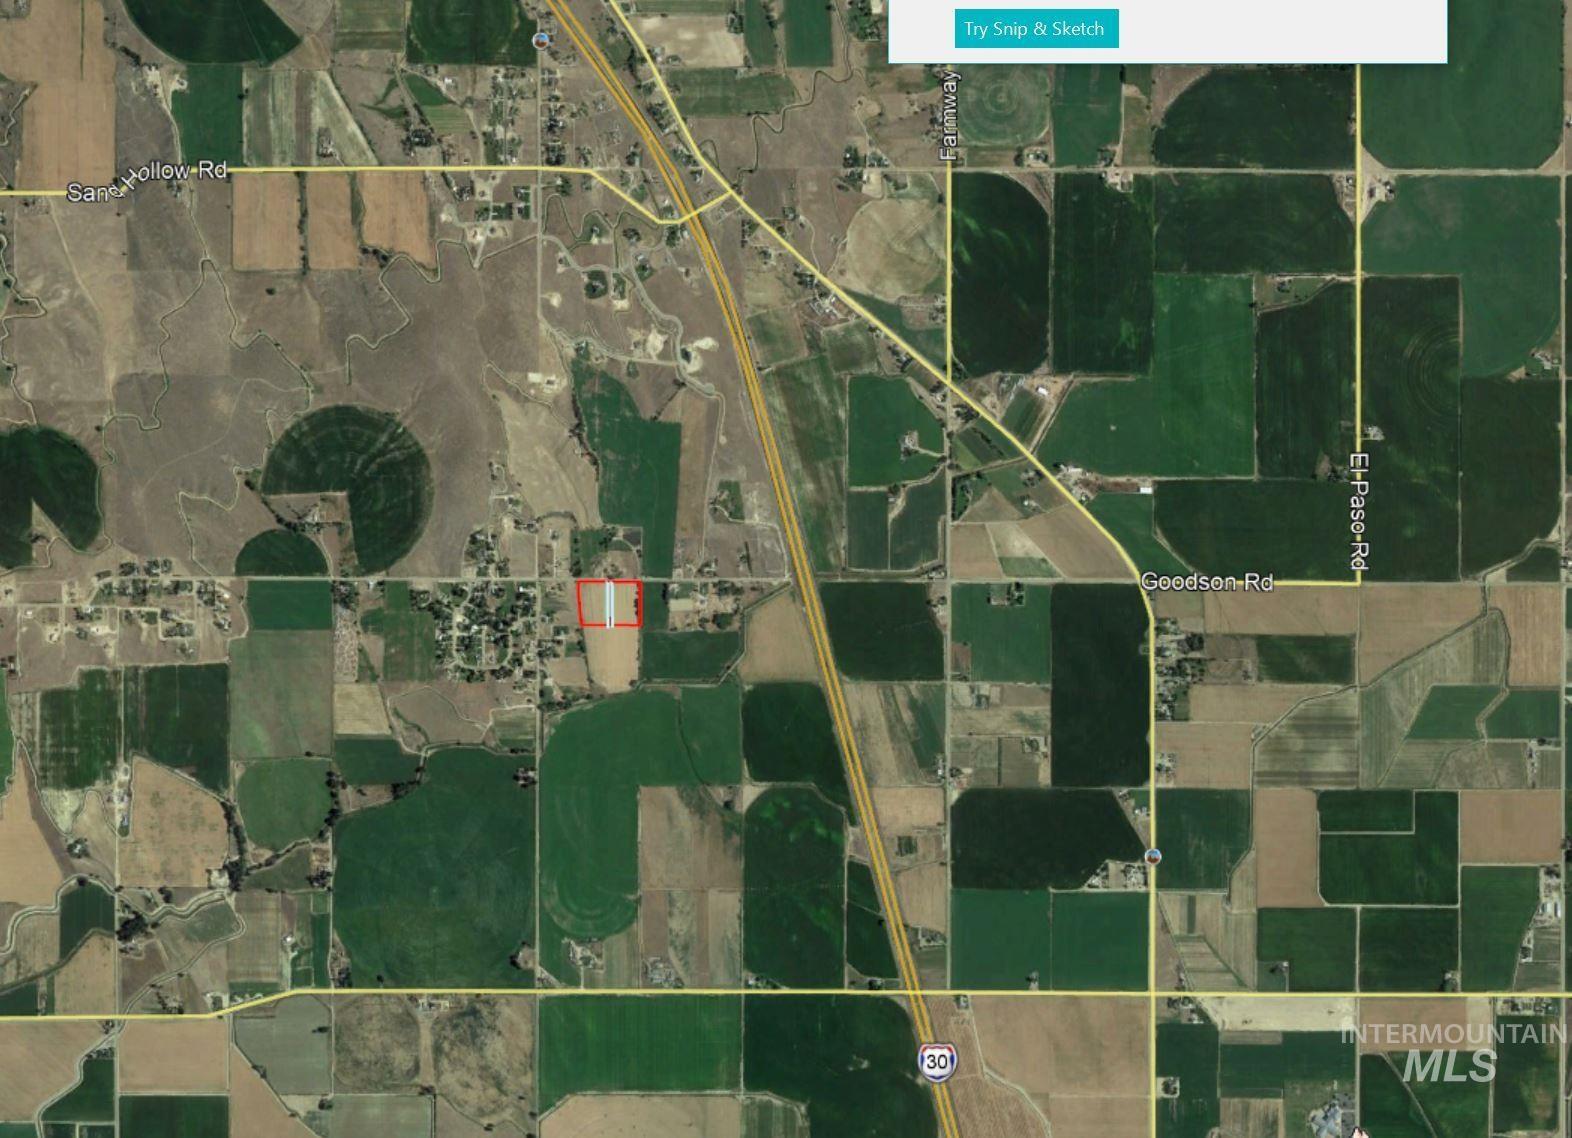 16865 Goodson Rd, Caldwell, Idaho 83607, Land For Sale, Price $285,000,MLS 98859766